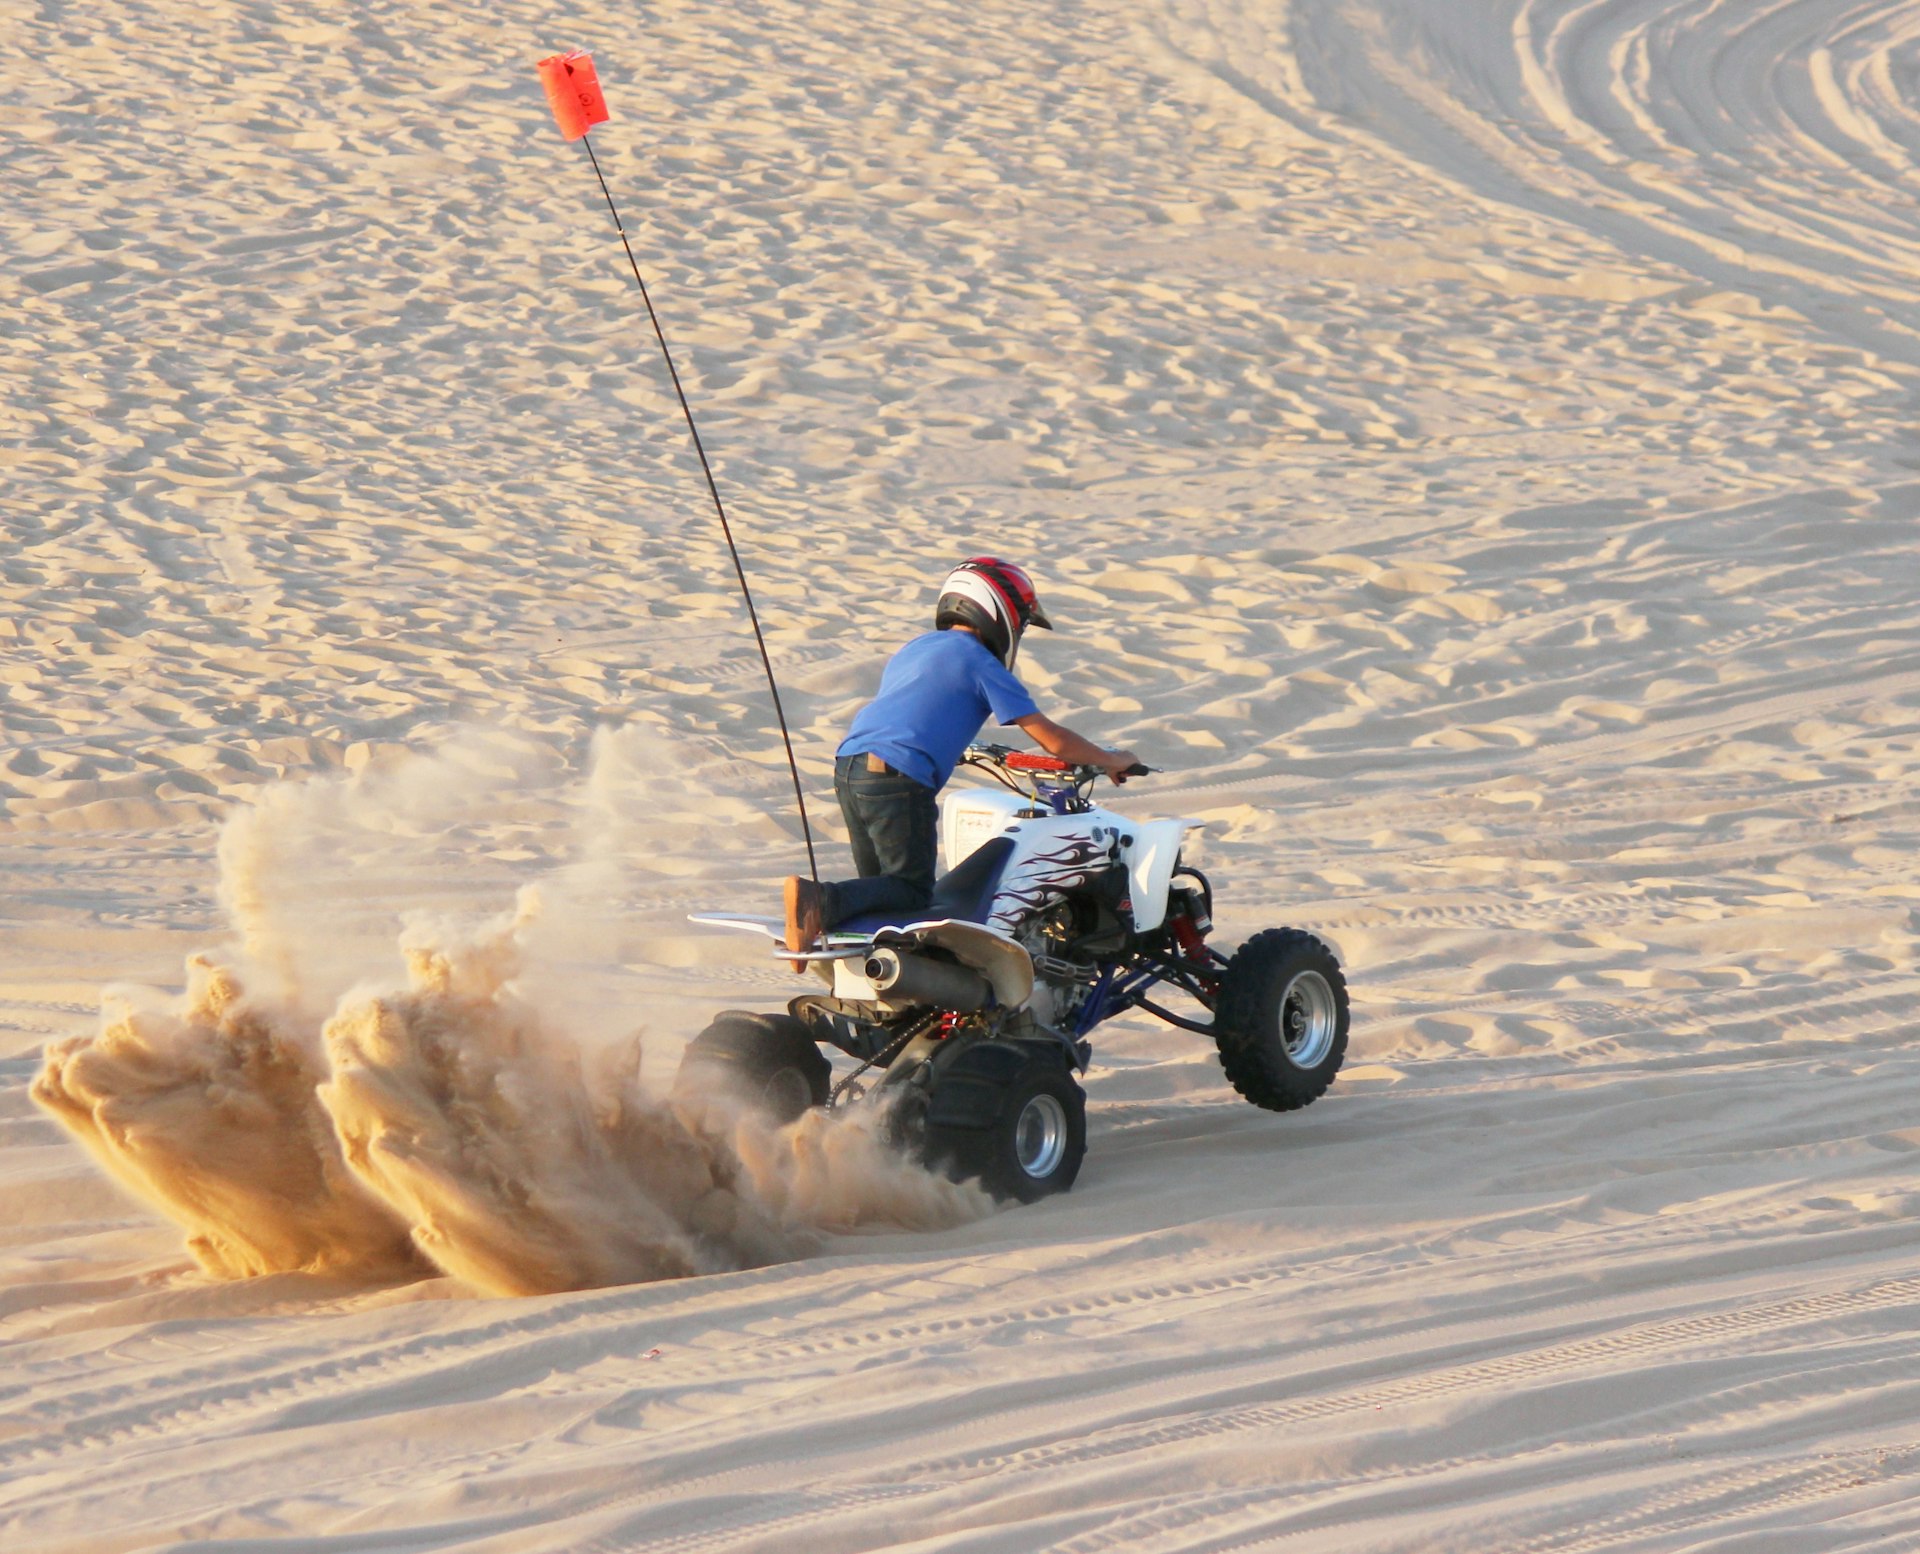 A quad rider doing a burnout on the sand in Michigan